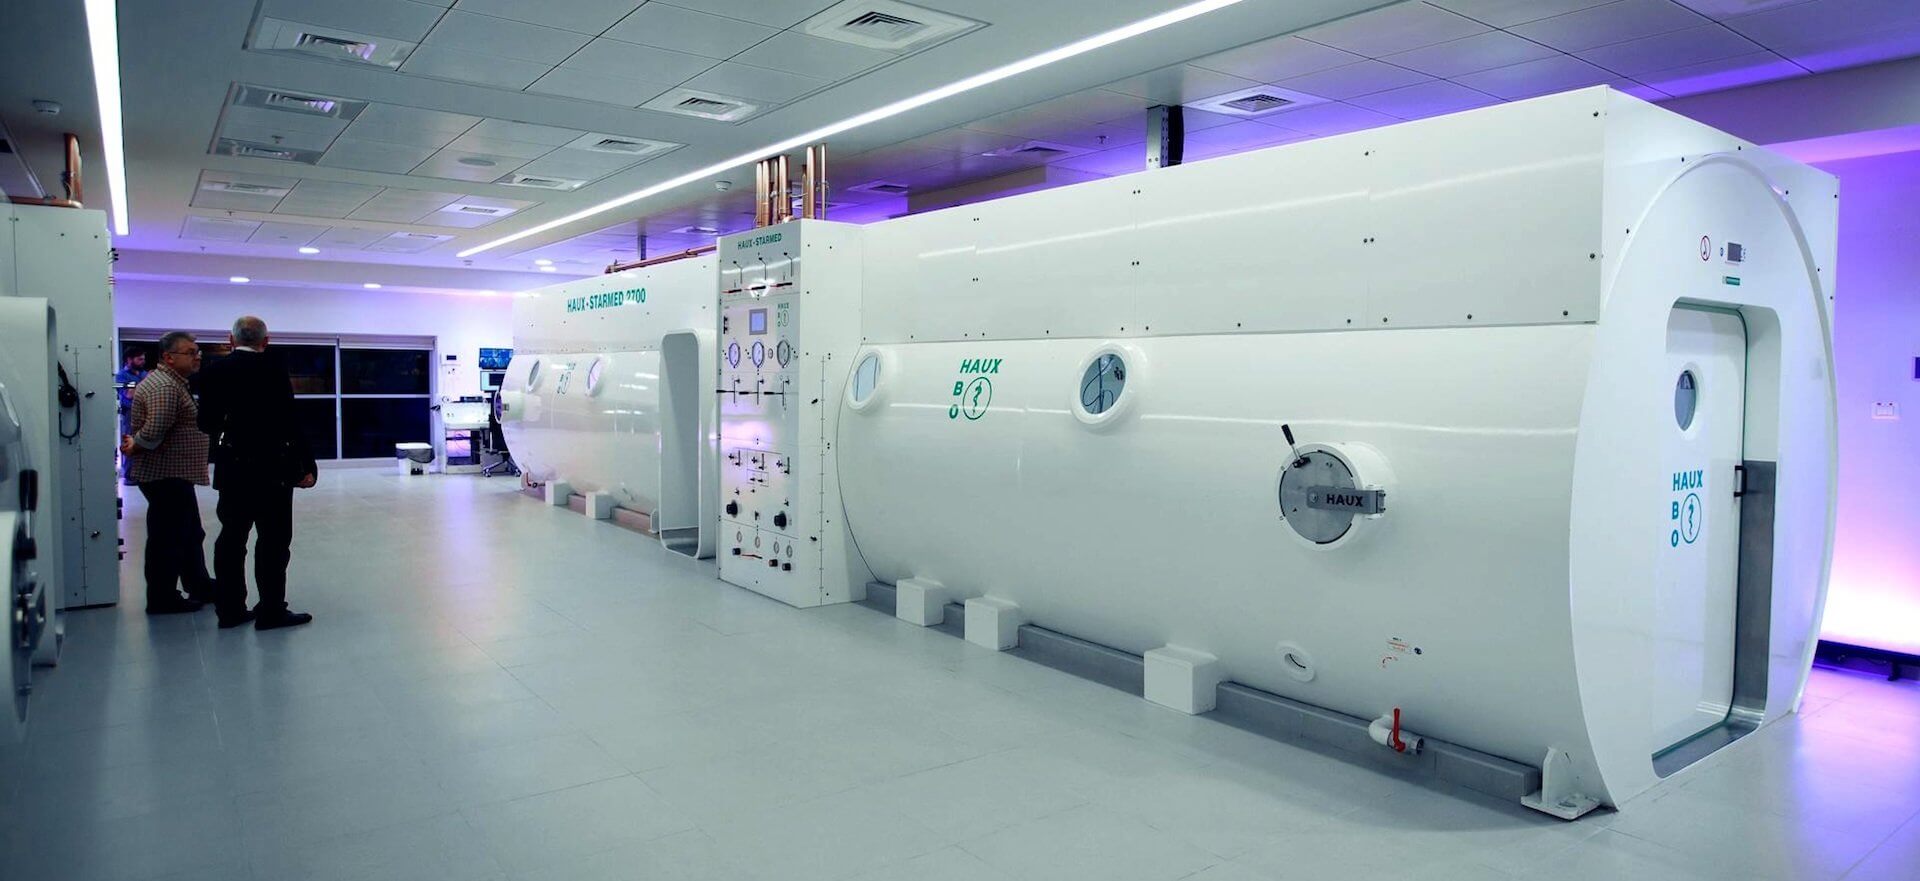 Two 20-seat hyperbaric chambers at the Sagol Center for Hyperbaric Medicine and Research in Israel were used in a study to see if hyperbaric oxygen treatment could help patients with fibromyalgia. (Credit: Sagol Center for Hyperbaric Medicine and Research)